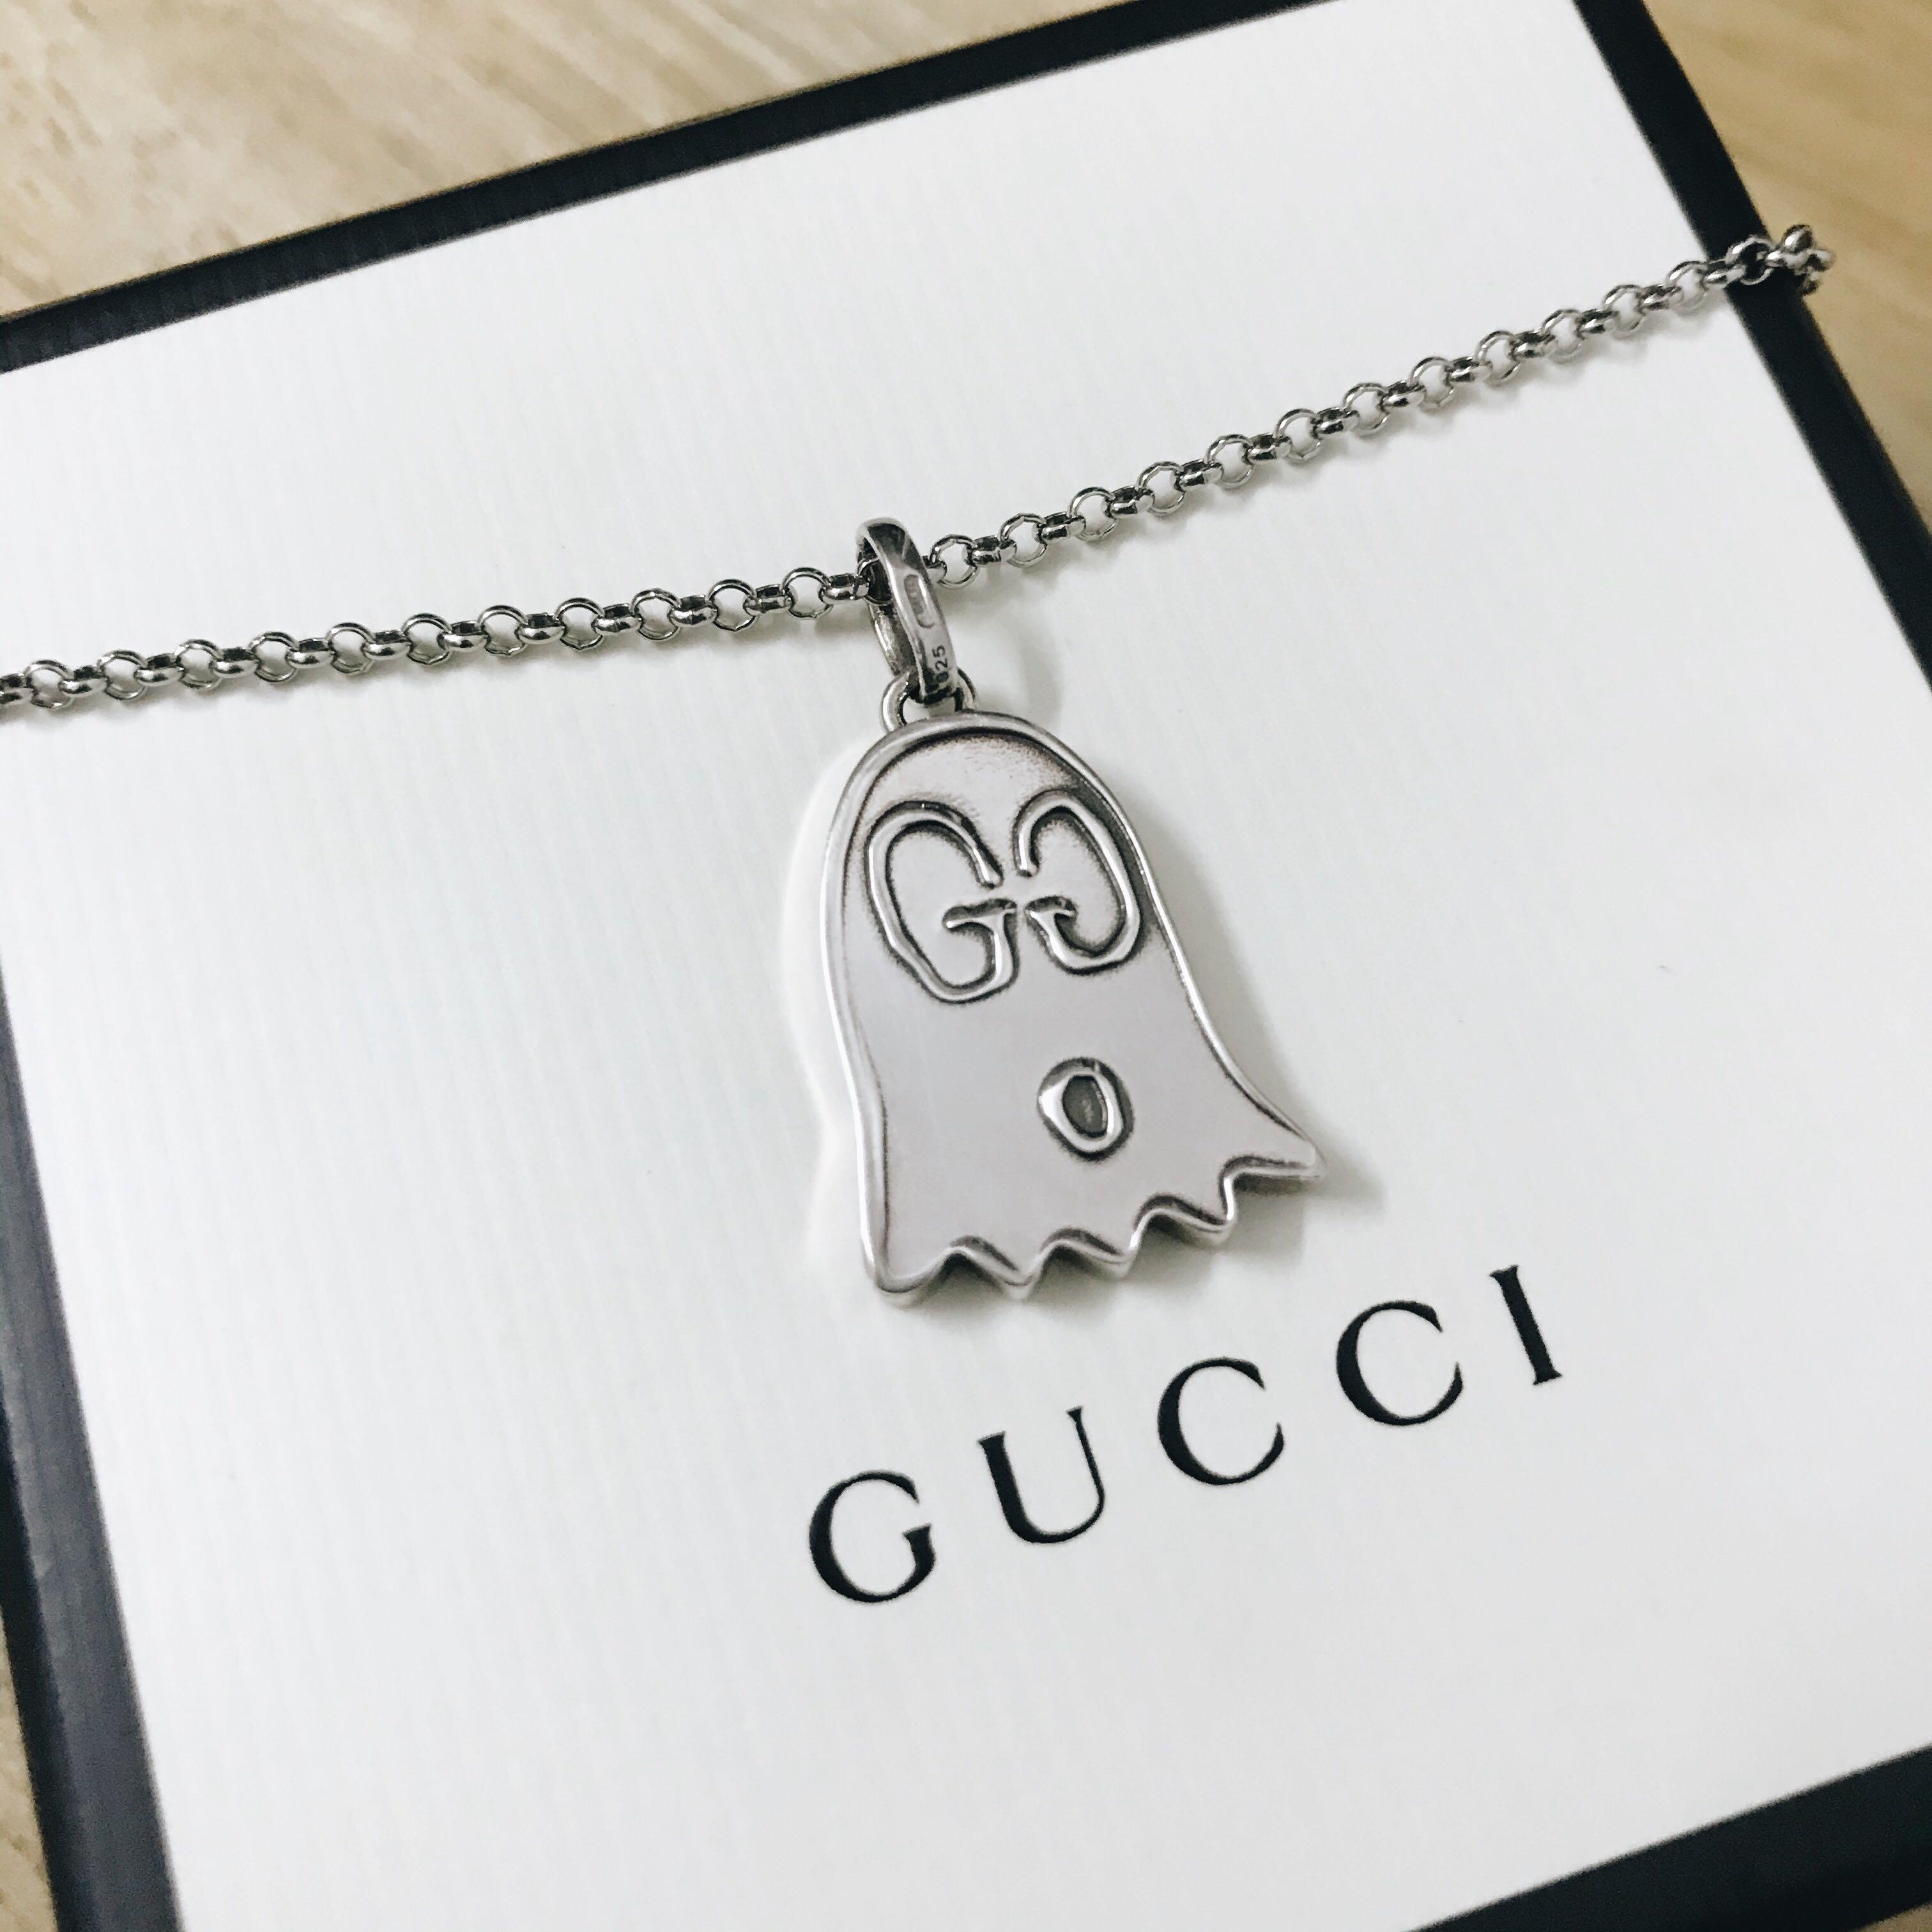 GUCCI Ghost Red Enamel Sterling Silver Necklace Pendant W/Box Pouch | eBay